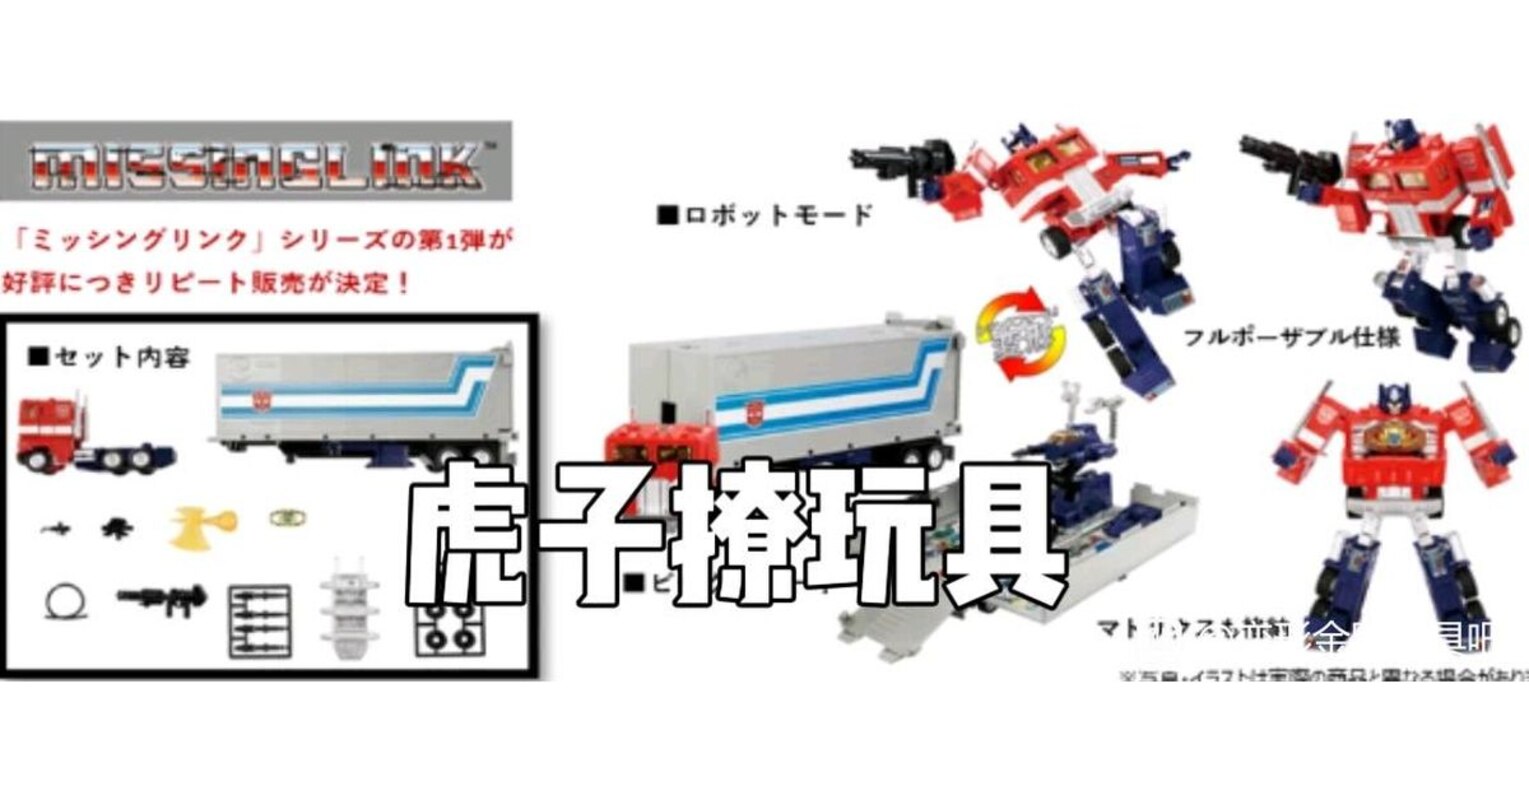 Missing Link C-01 Convoy 2nd Run Transformers G1 Figure Coming Soon